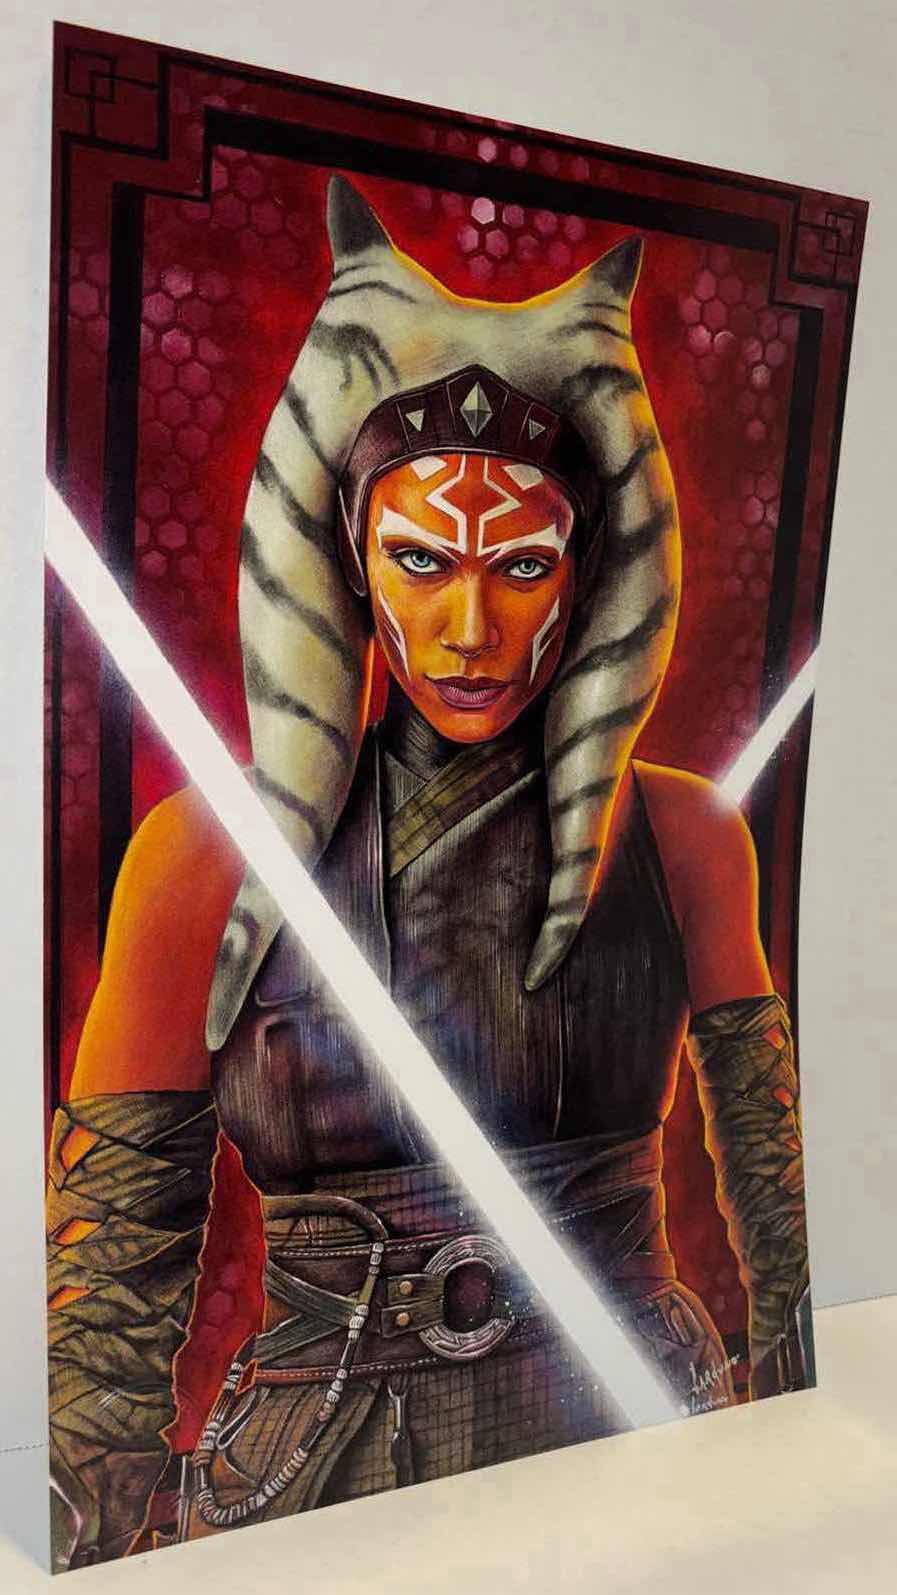 Photo 1 of VICTOR GARDUNO AHSOKA TANO 11” X 17” INFINITY GLOSS UNFRAMED PRINT W EMBOSSED SEAL, DIGITAL SIGNATURE & OFFICIAL SIGNATURE W COA INCLUDED, STORED IN A RIGID PRINT PROTECTOR SLEEVE